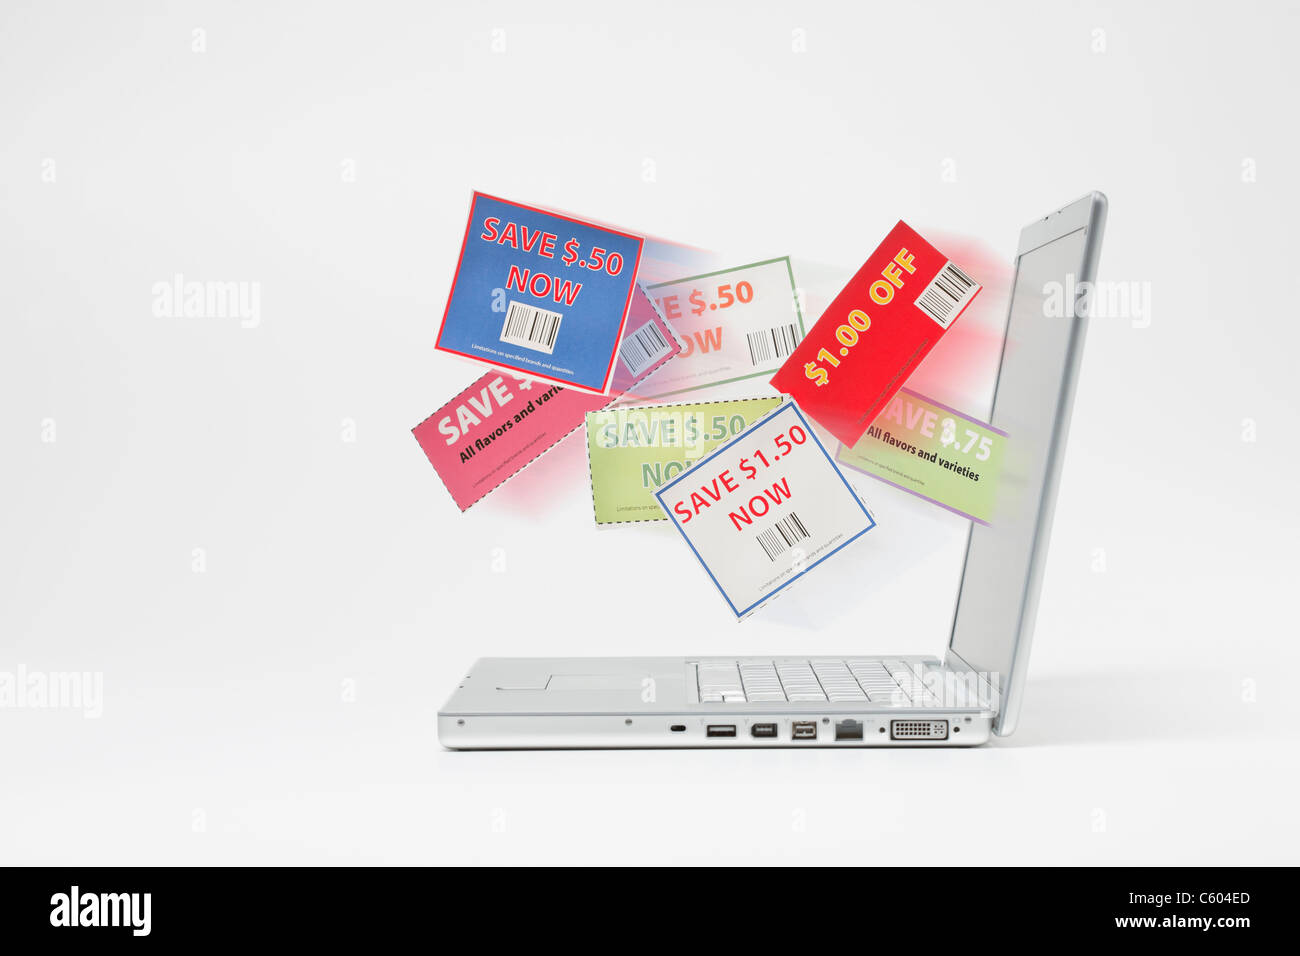 Coupons and laptop Stock Photo